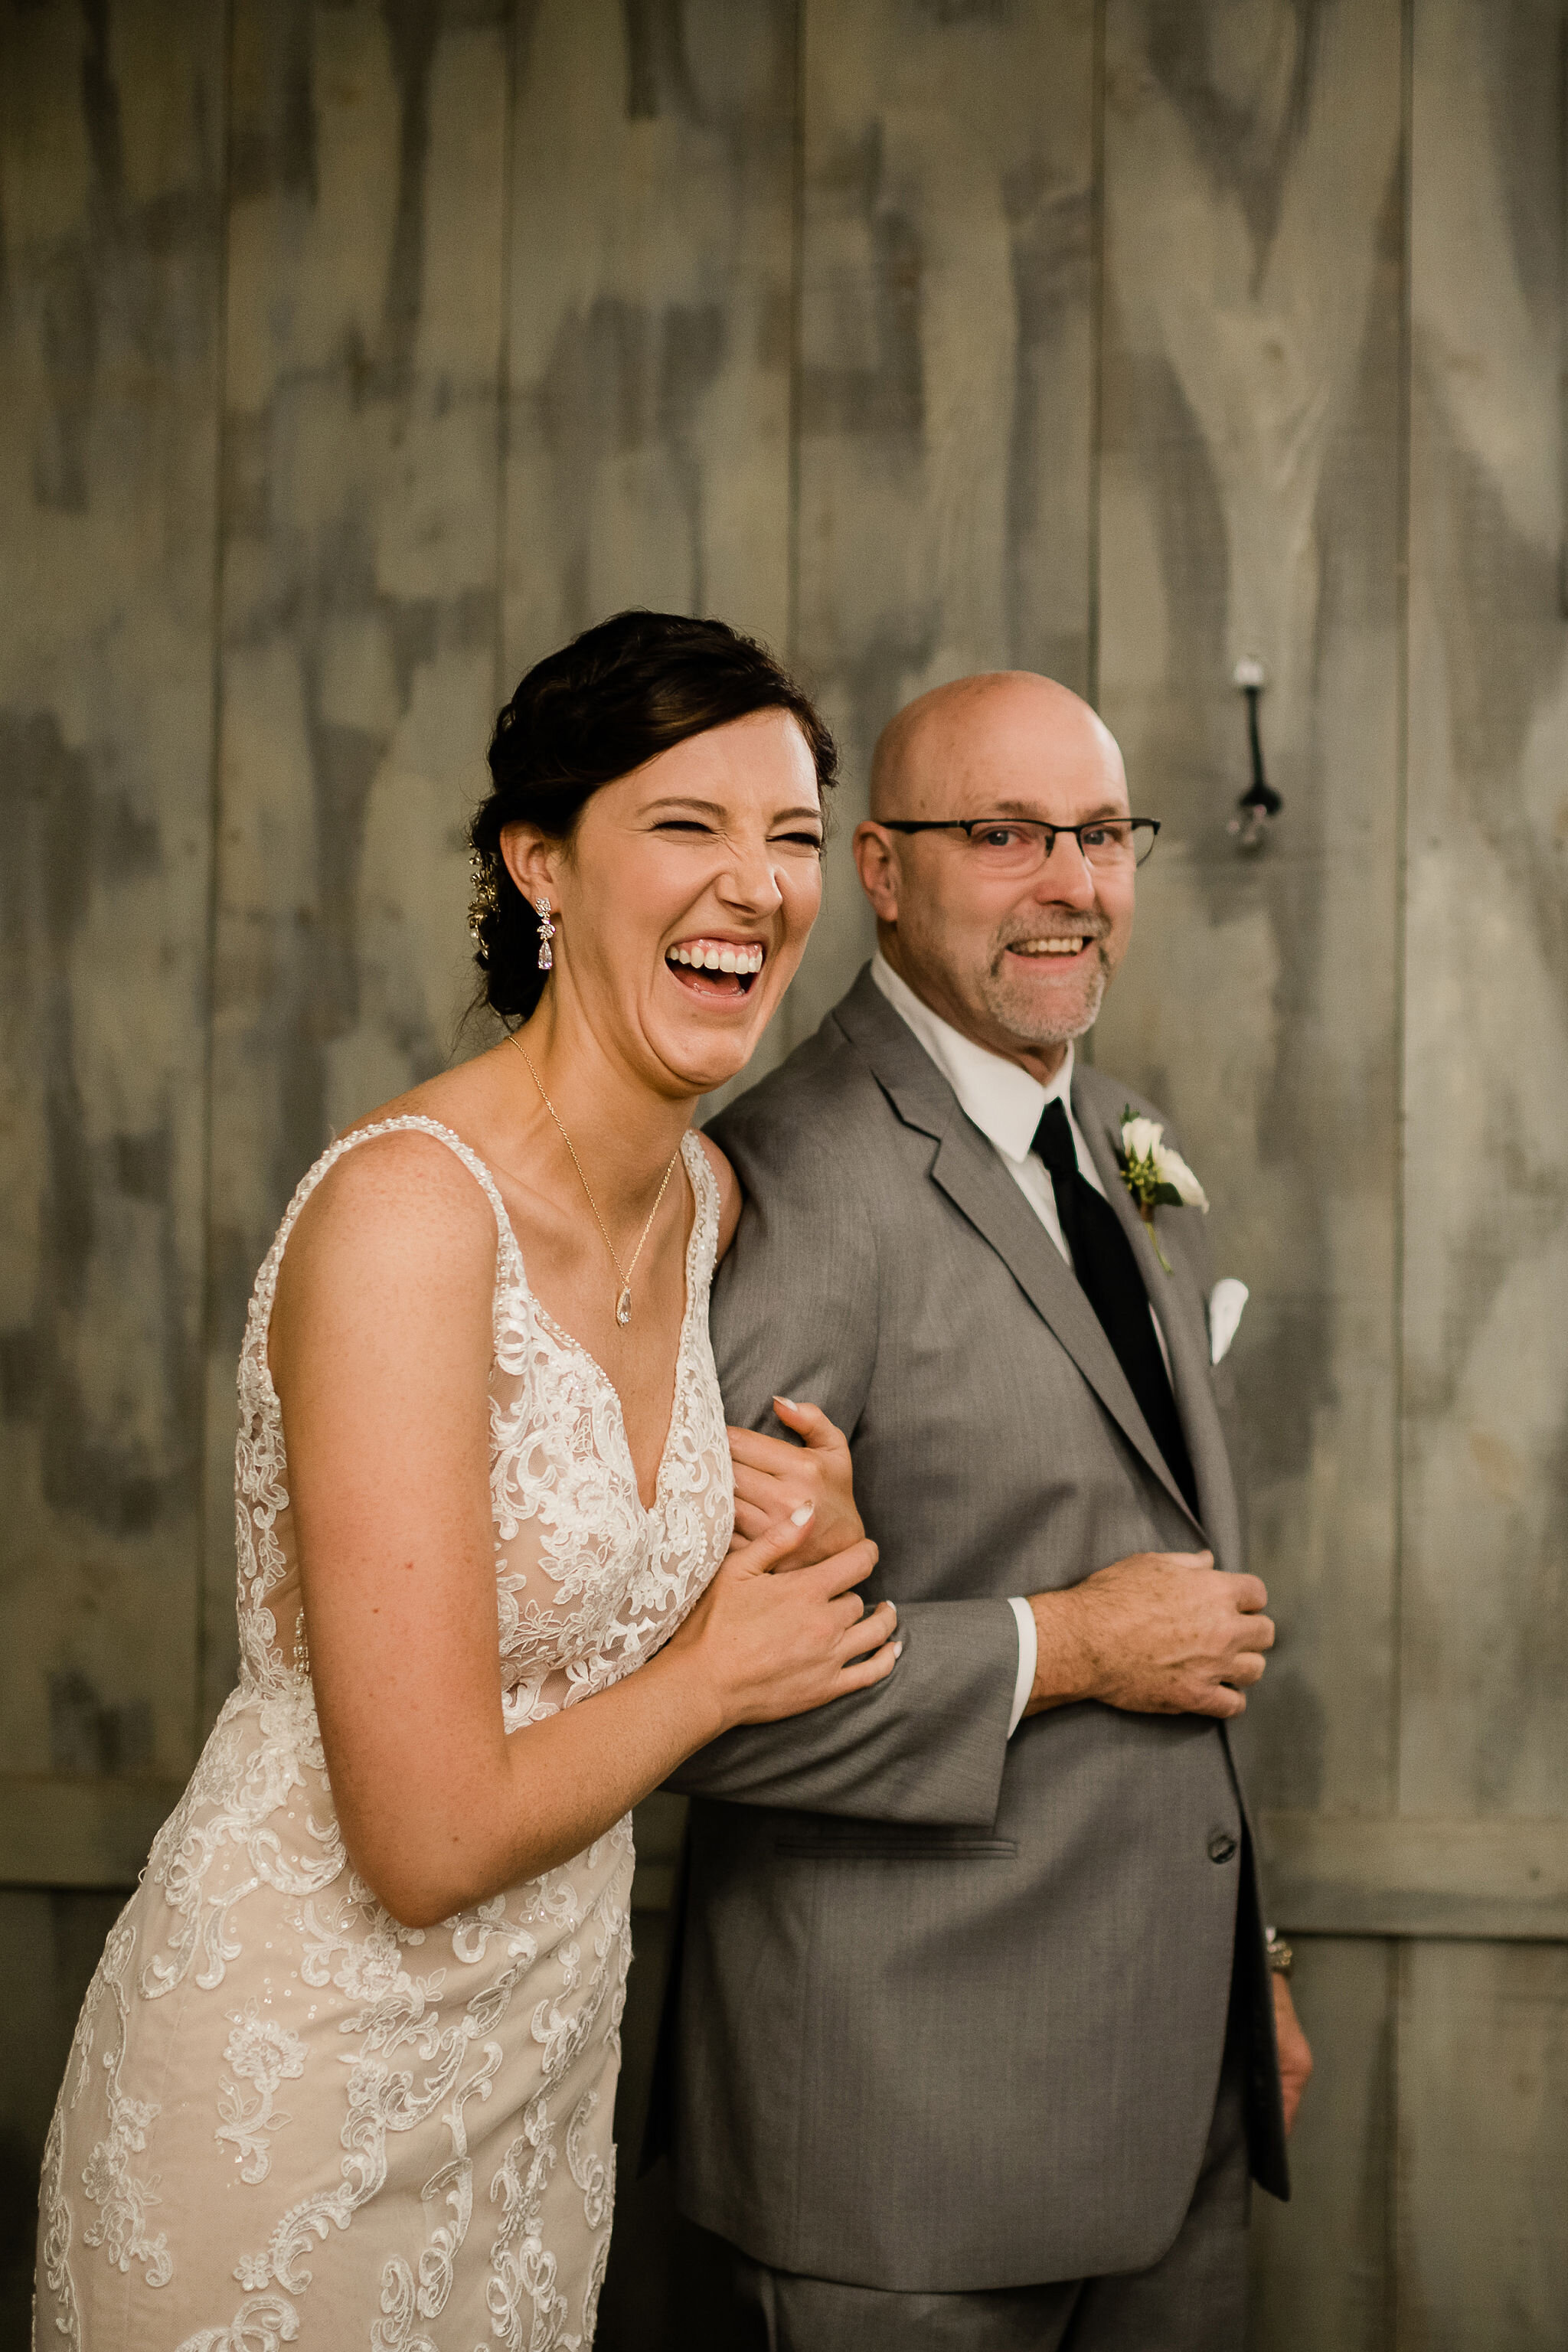 Bride laughing with her dad